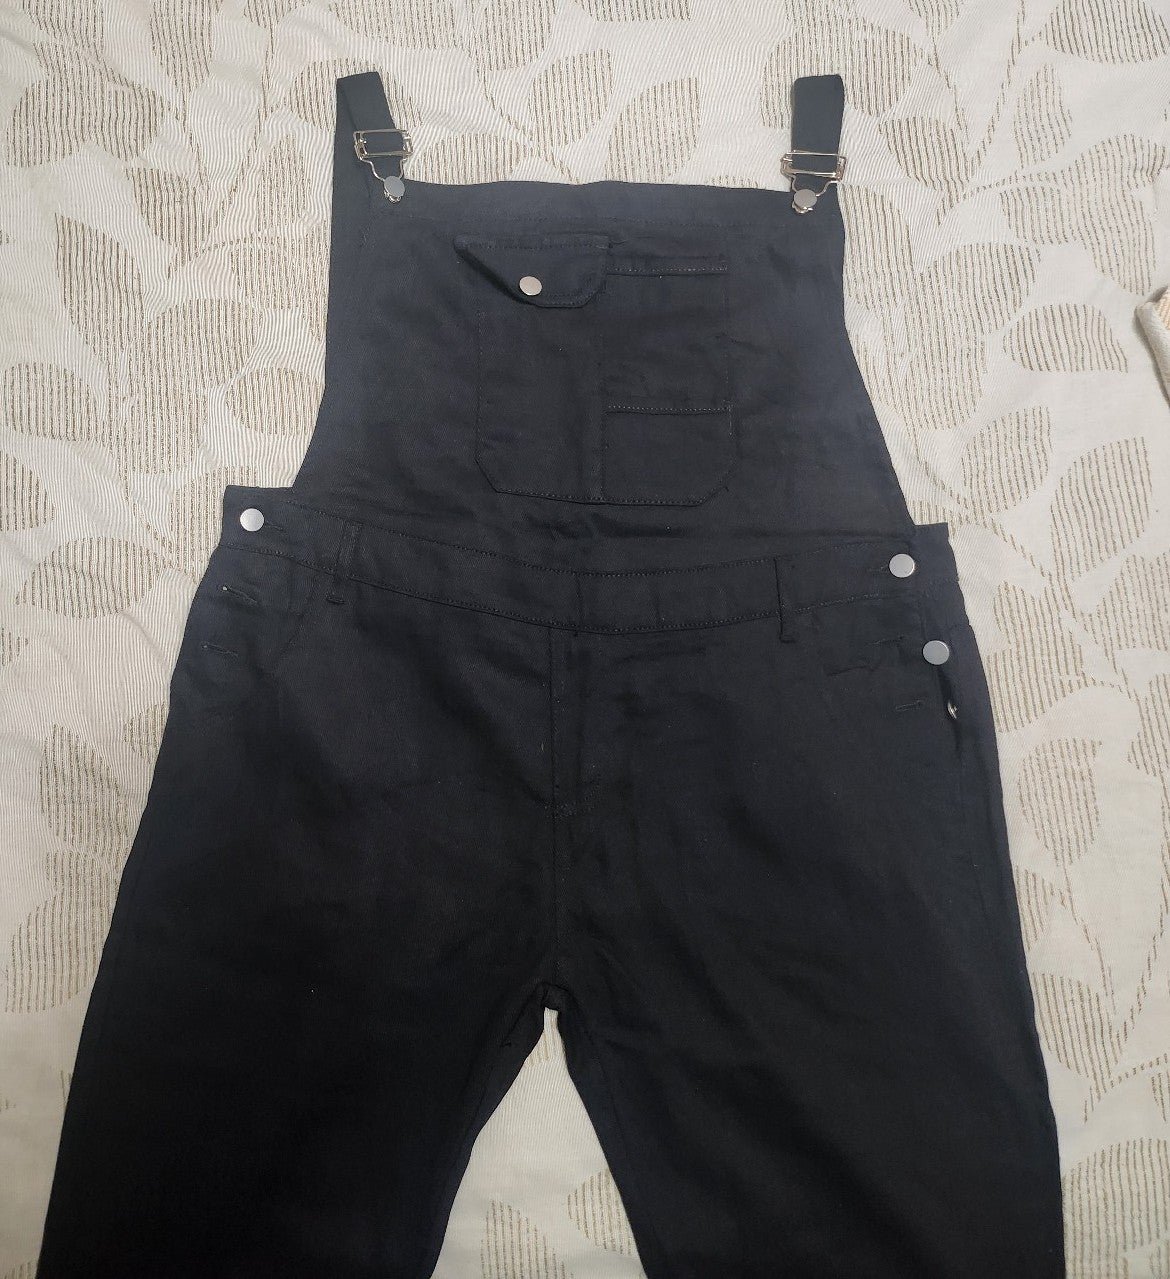 Discounted womens denim overalls jf1G5ZH7j for sale